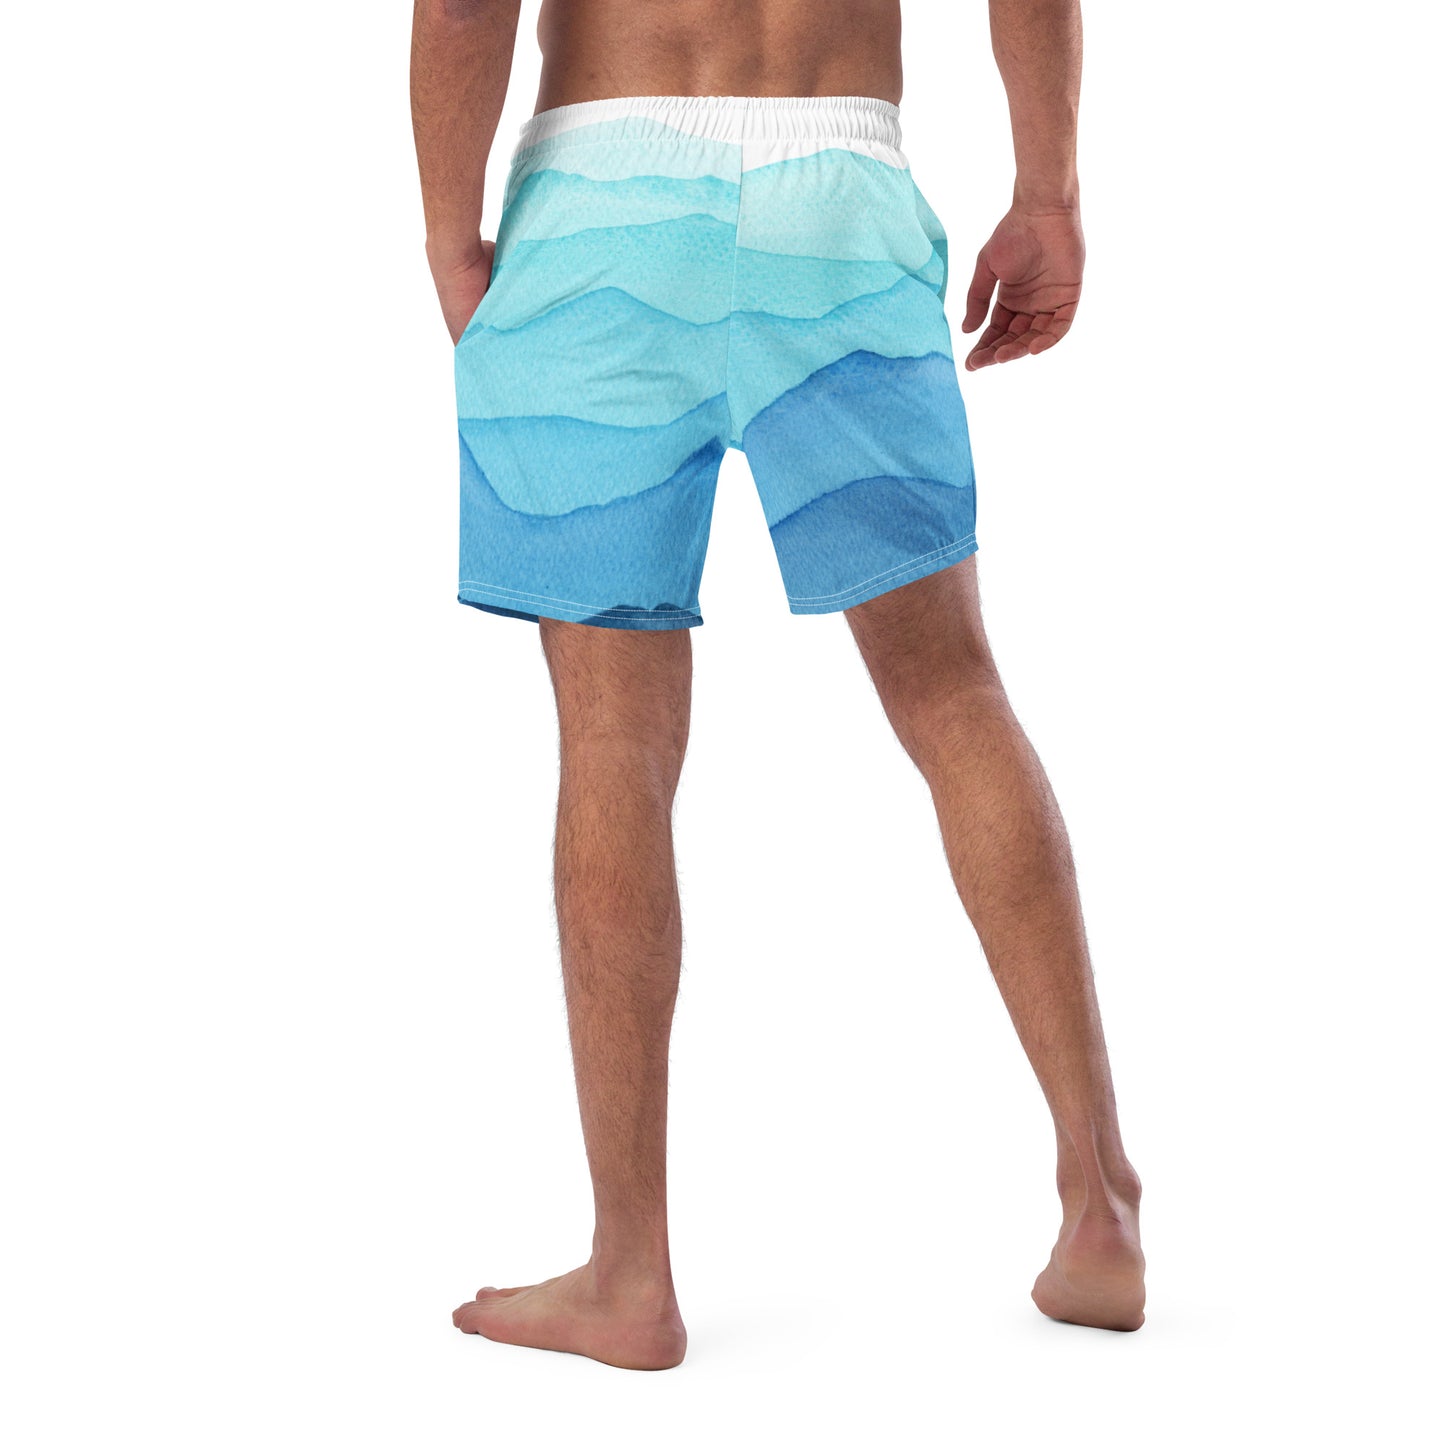 Water Color Trunks